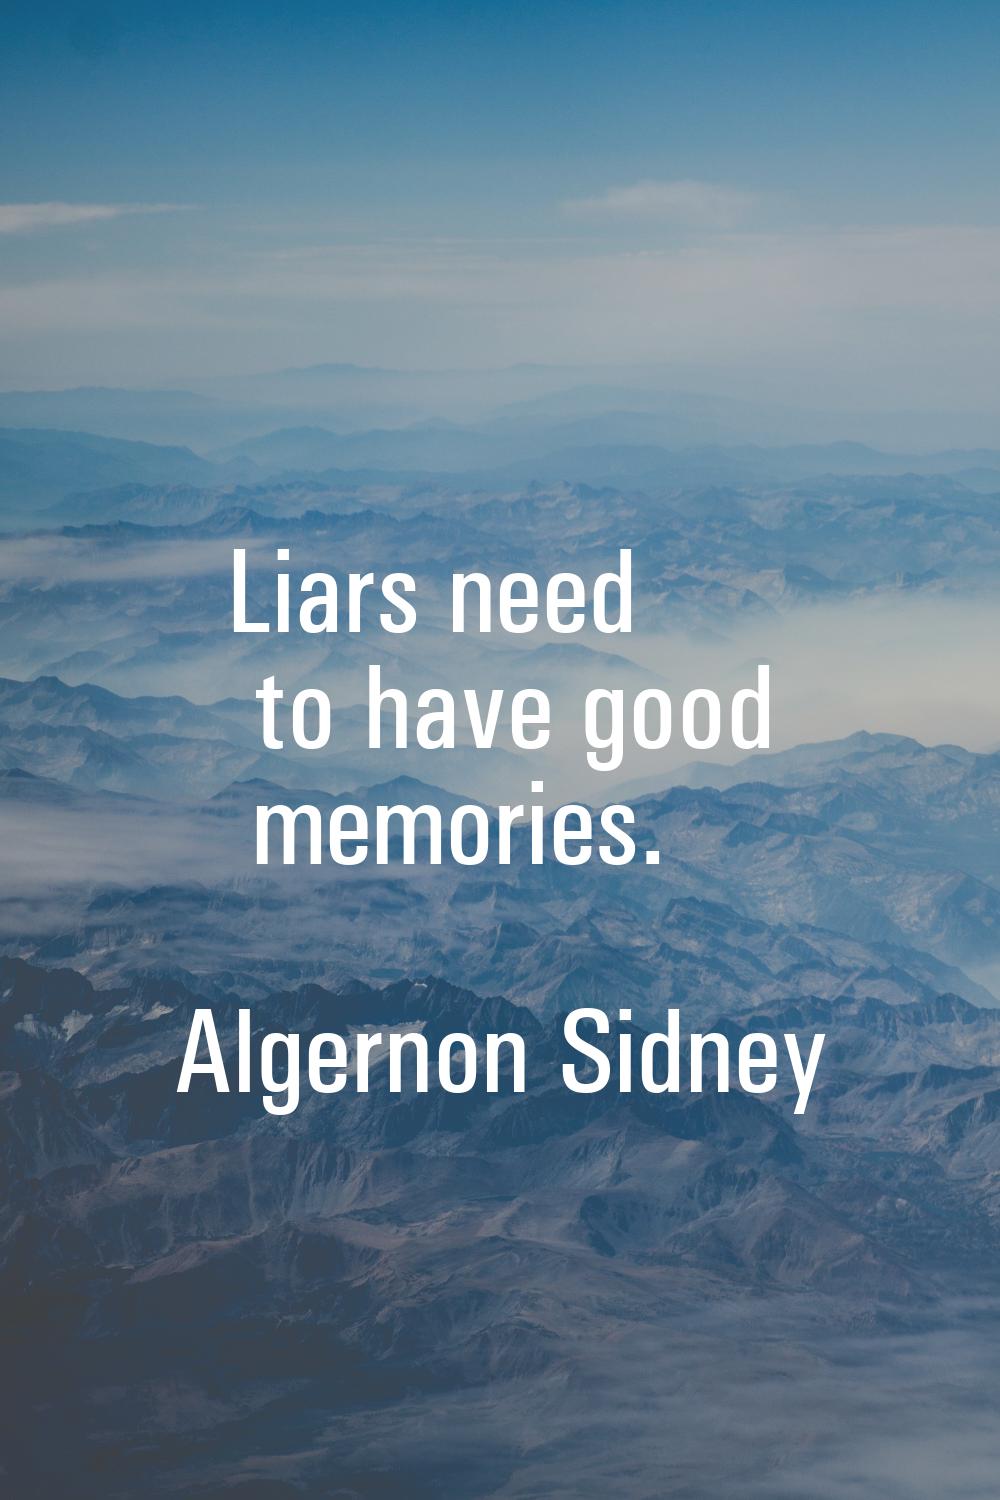 Liars need to have good memories.